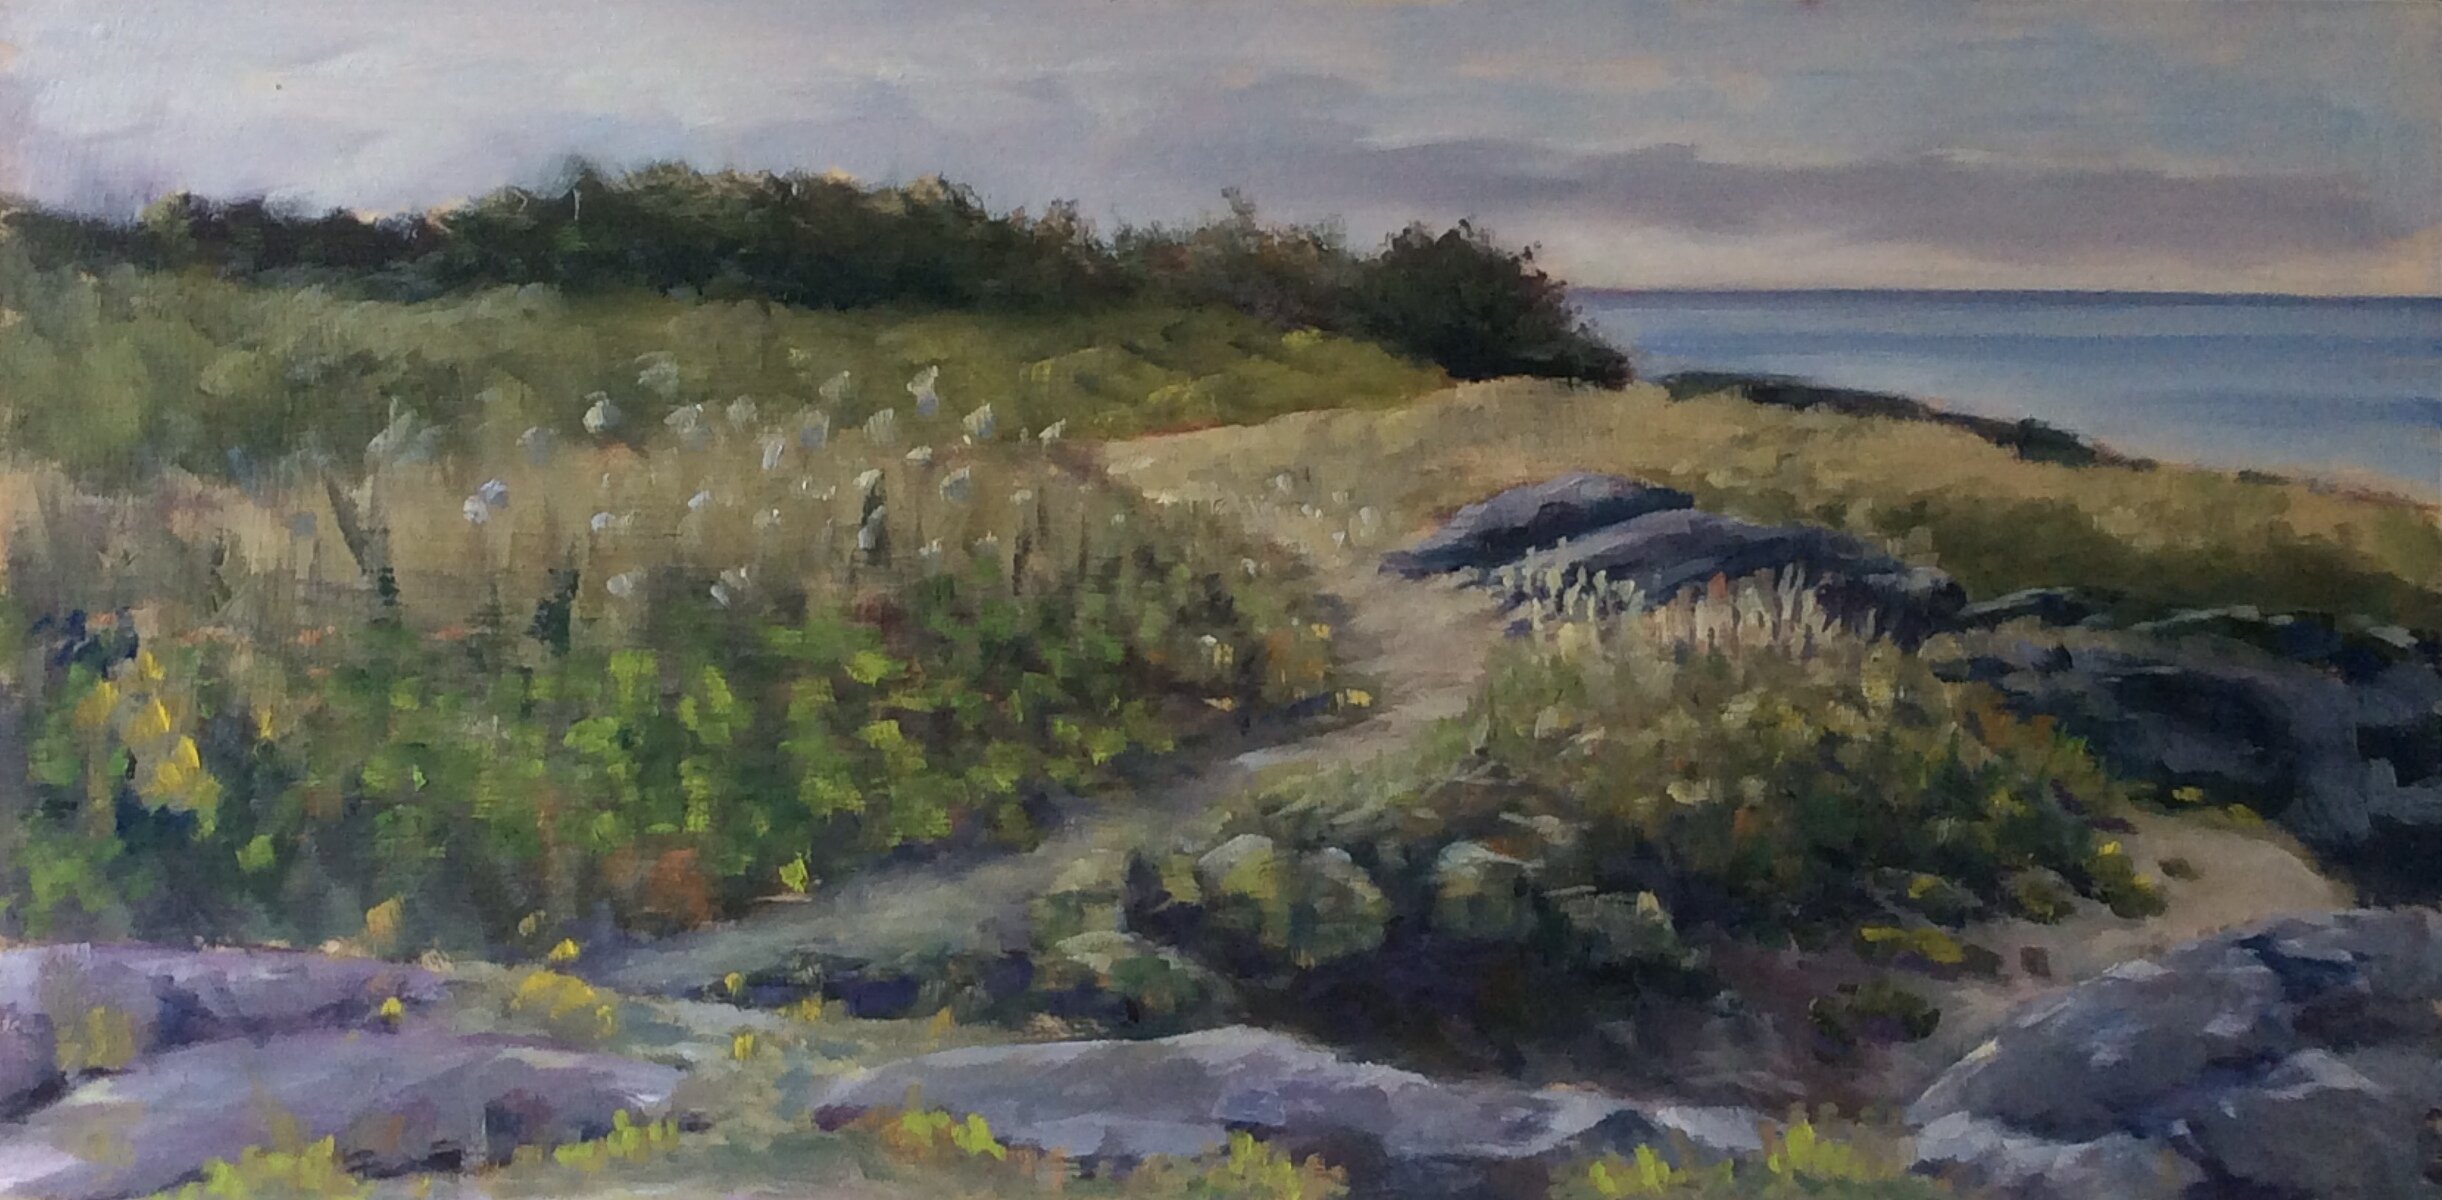 Pathway to the Ocean (SOLD)